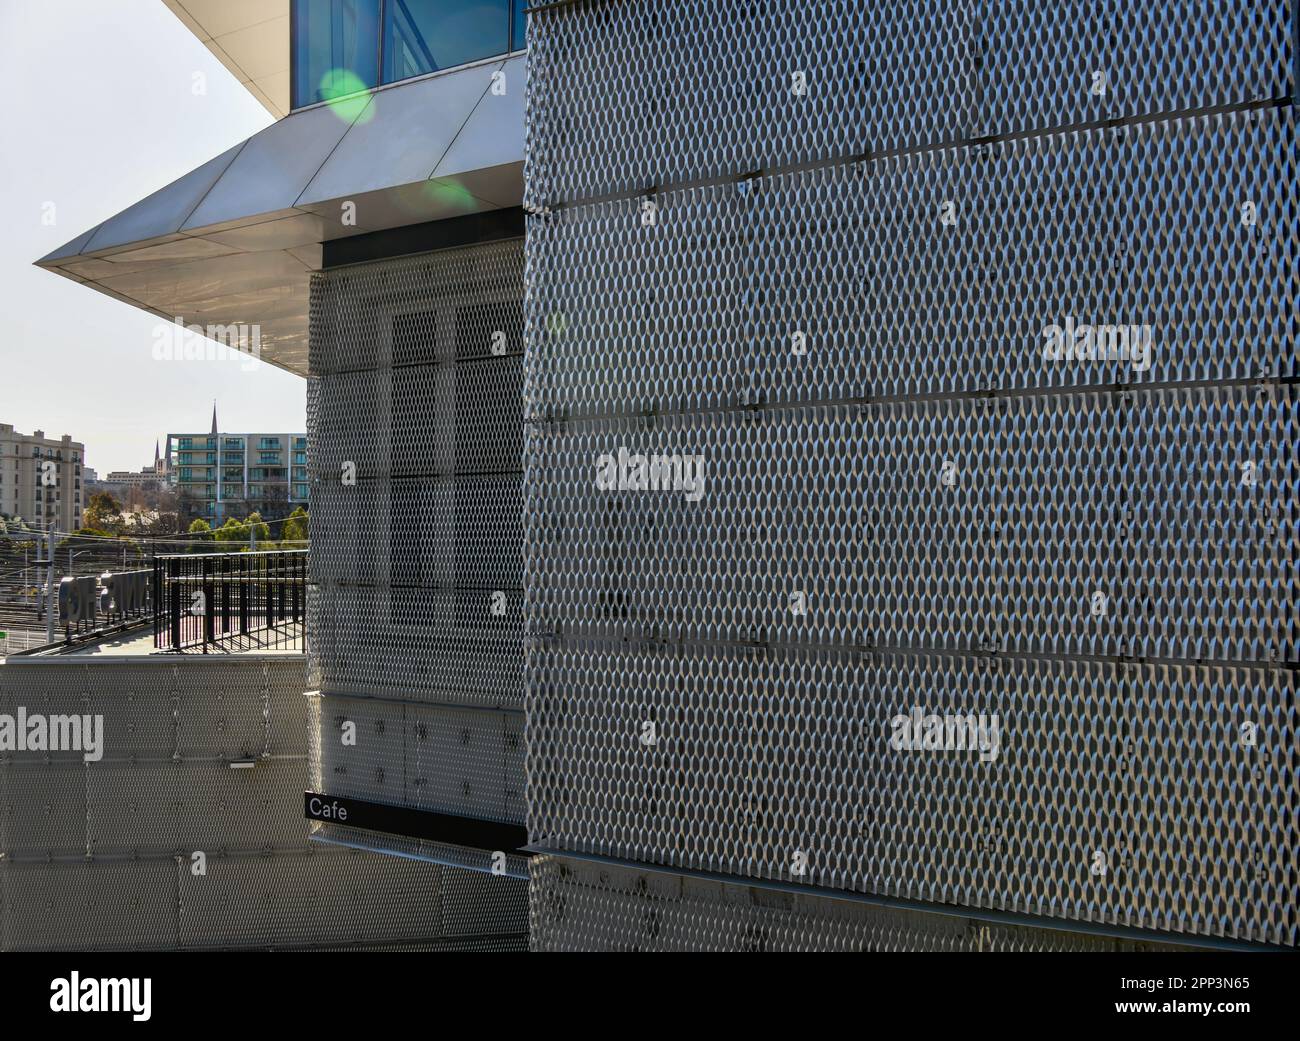 Architectural Design Metal Perforated Facade Fabric attached to Office Building in City Stock Photo